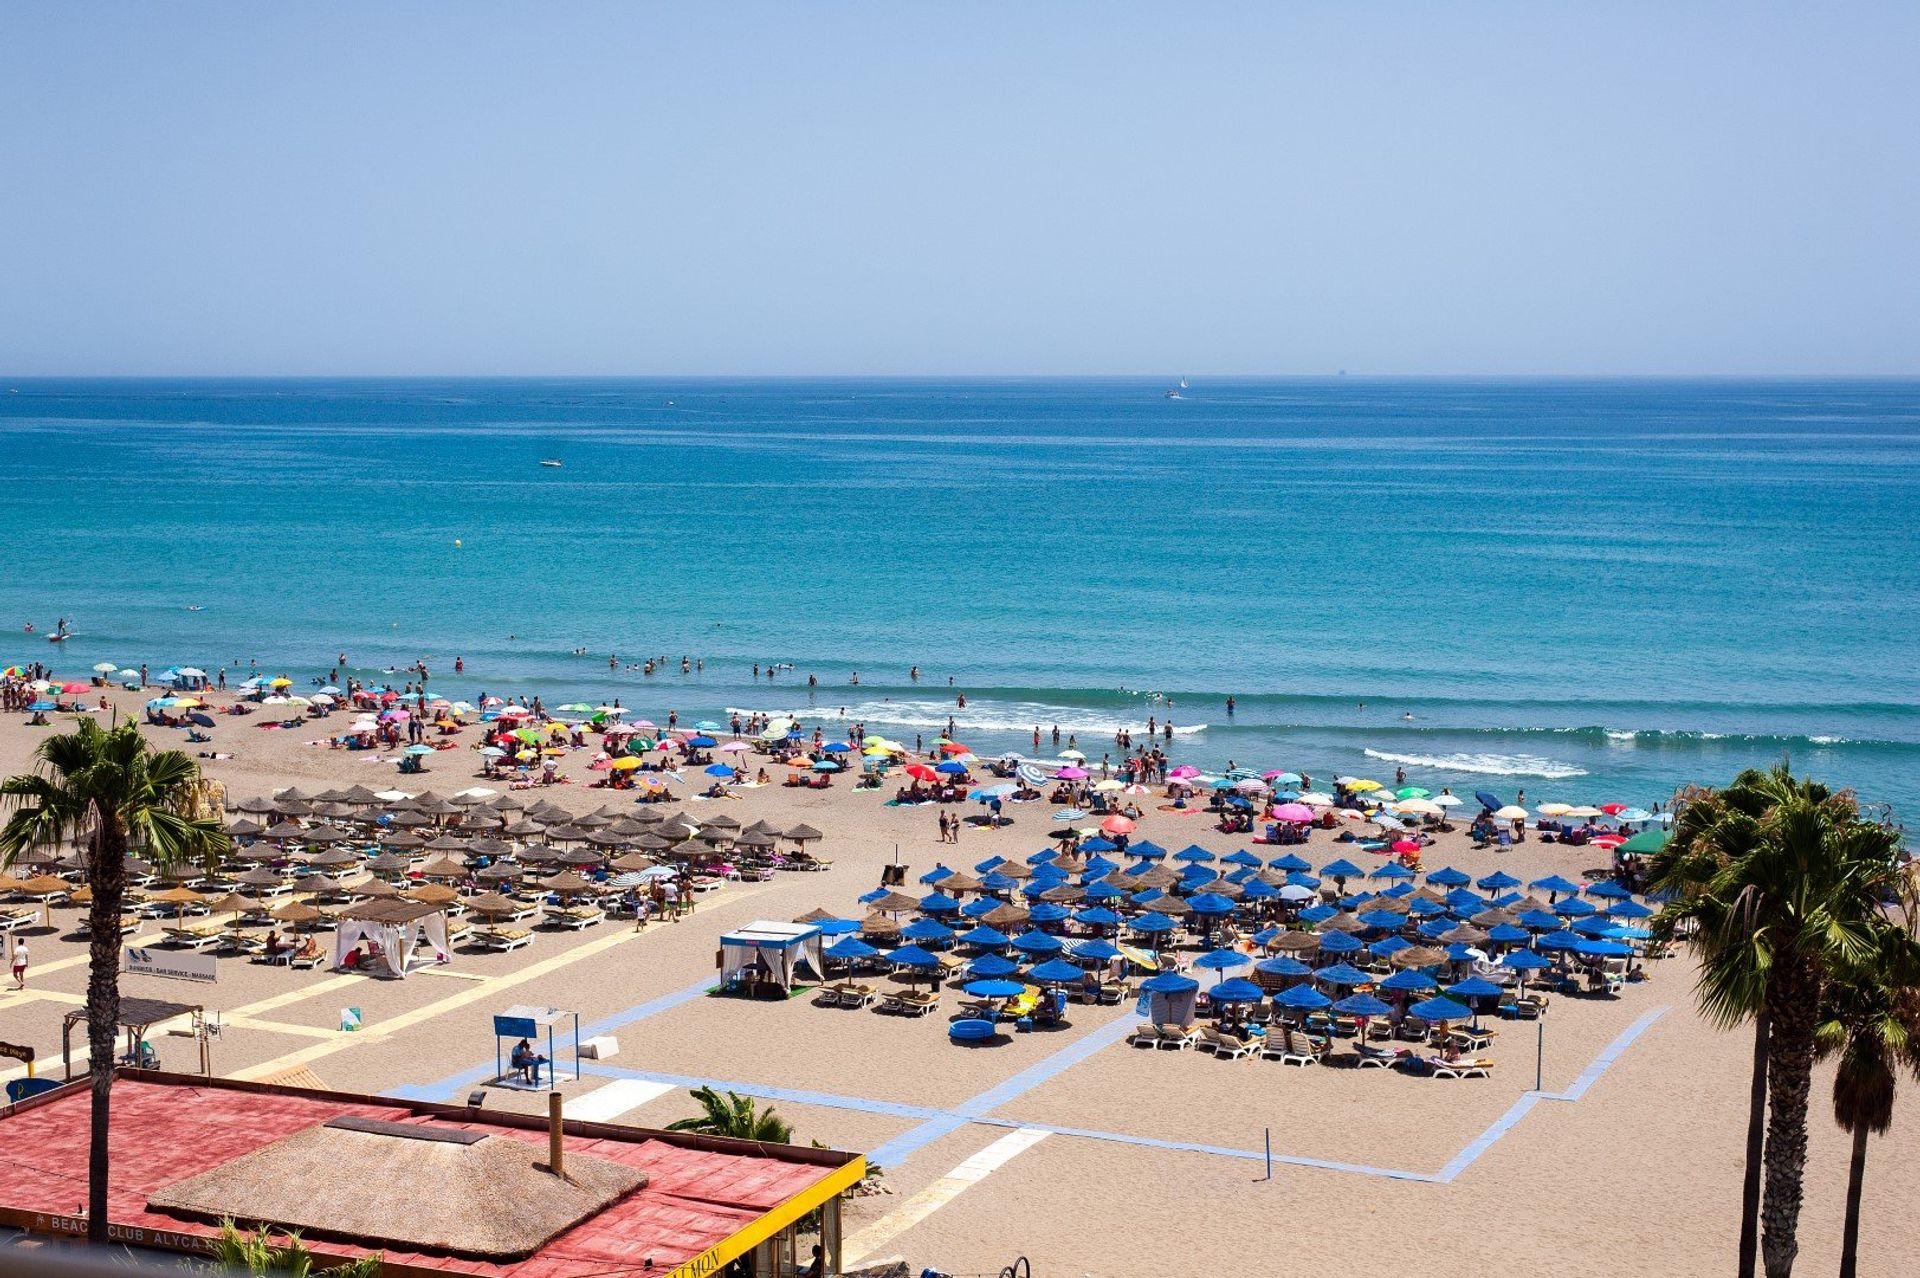 Lively Bajondillo beach is a perfect place to relax in the sun, people watch or have a cooling dip in the Mediterranean